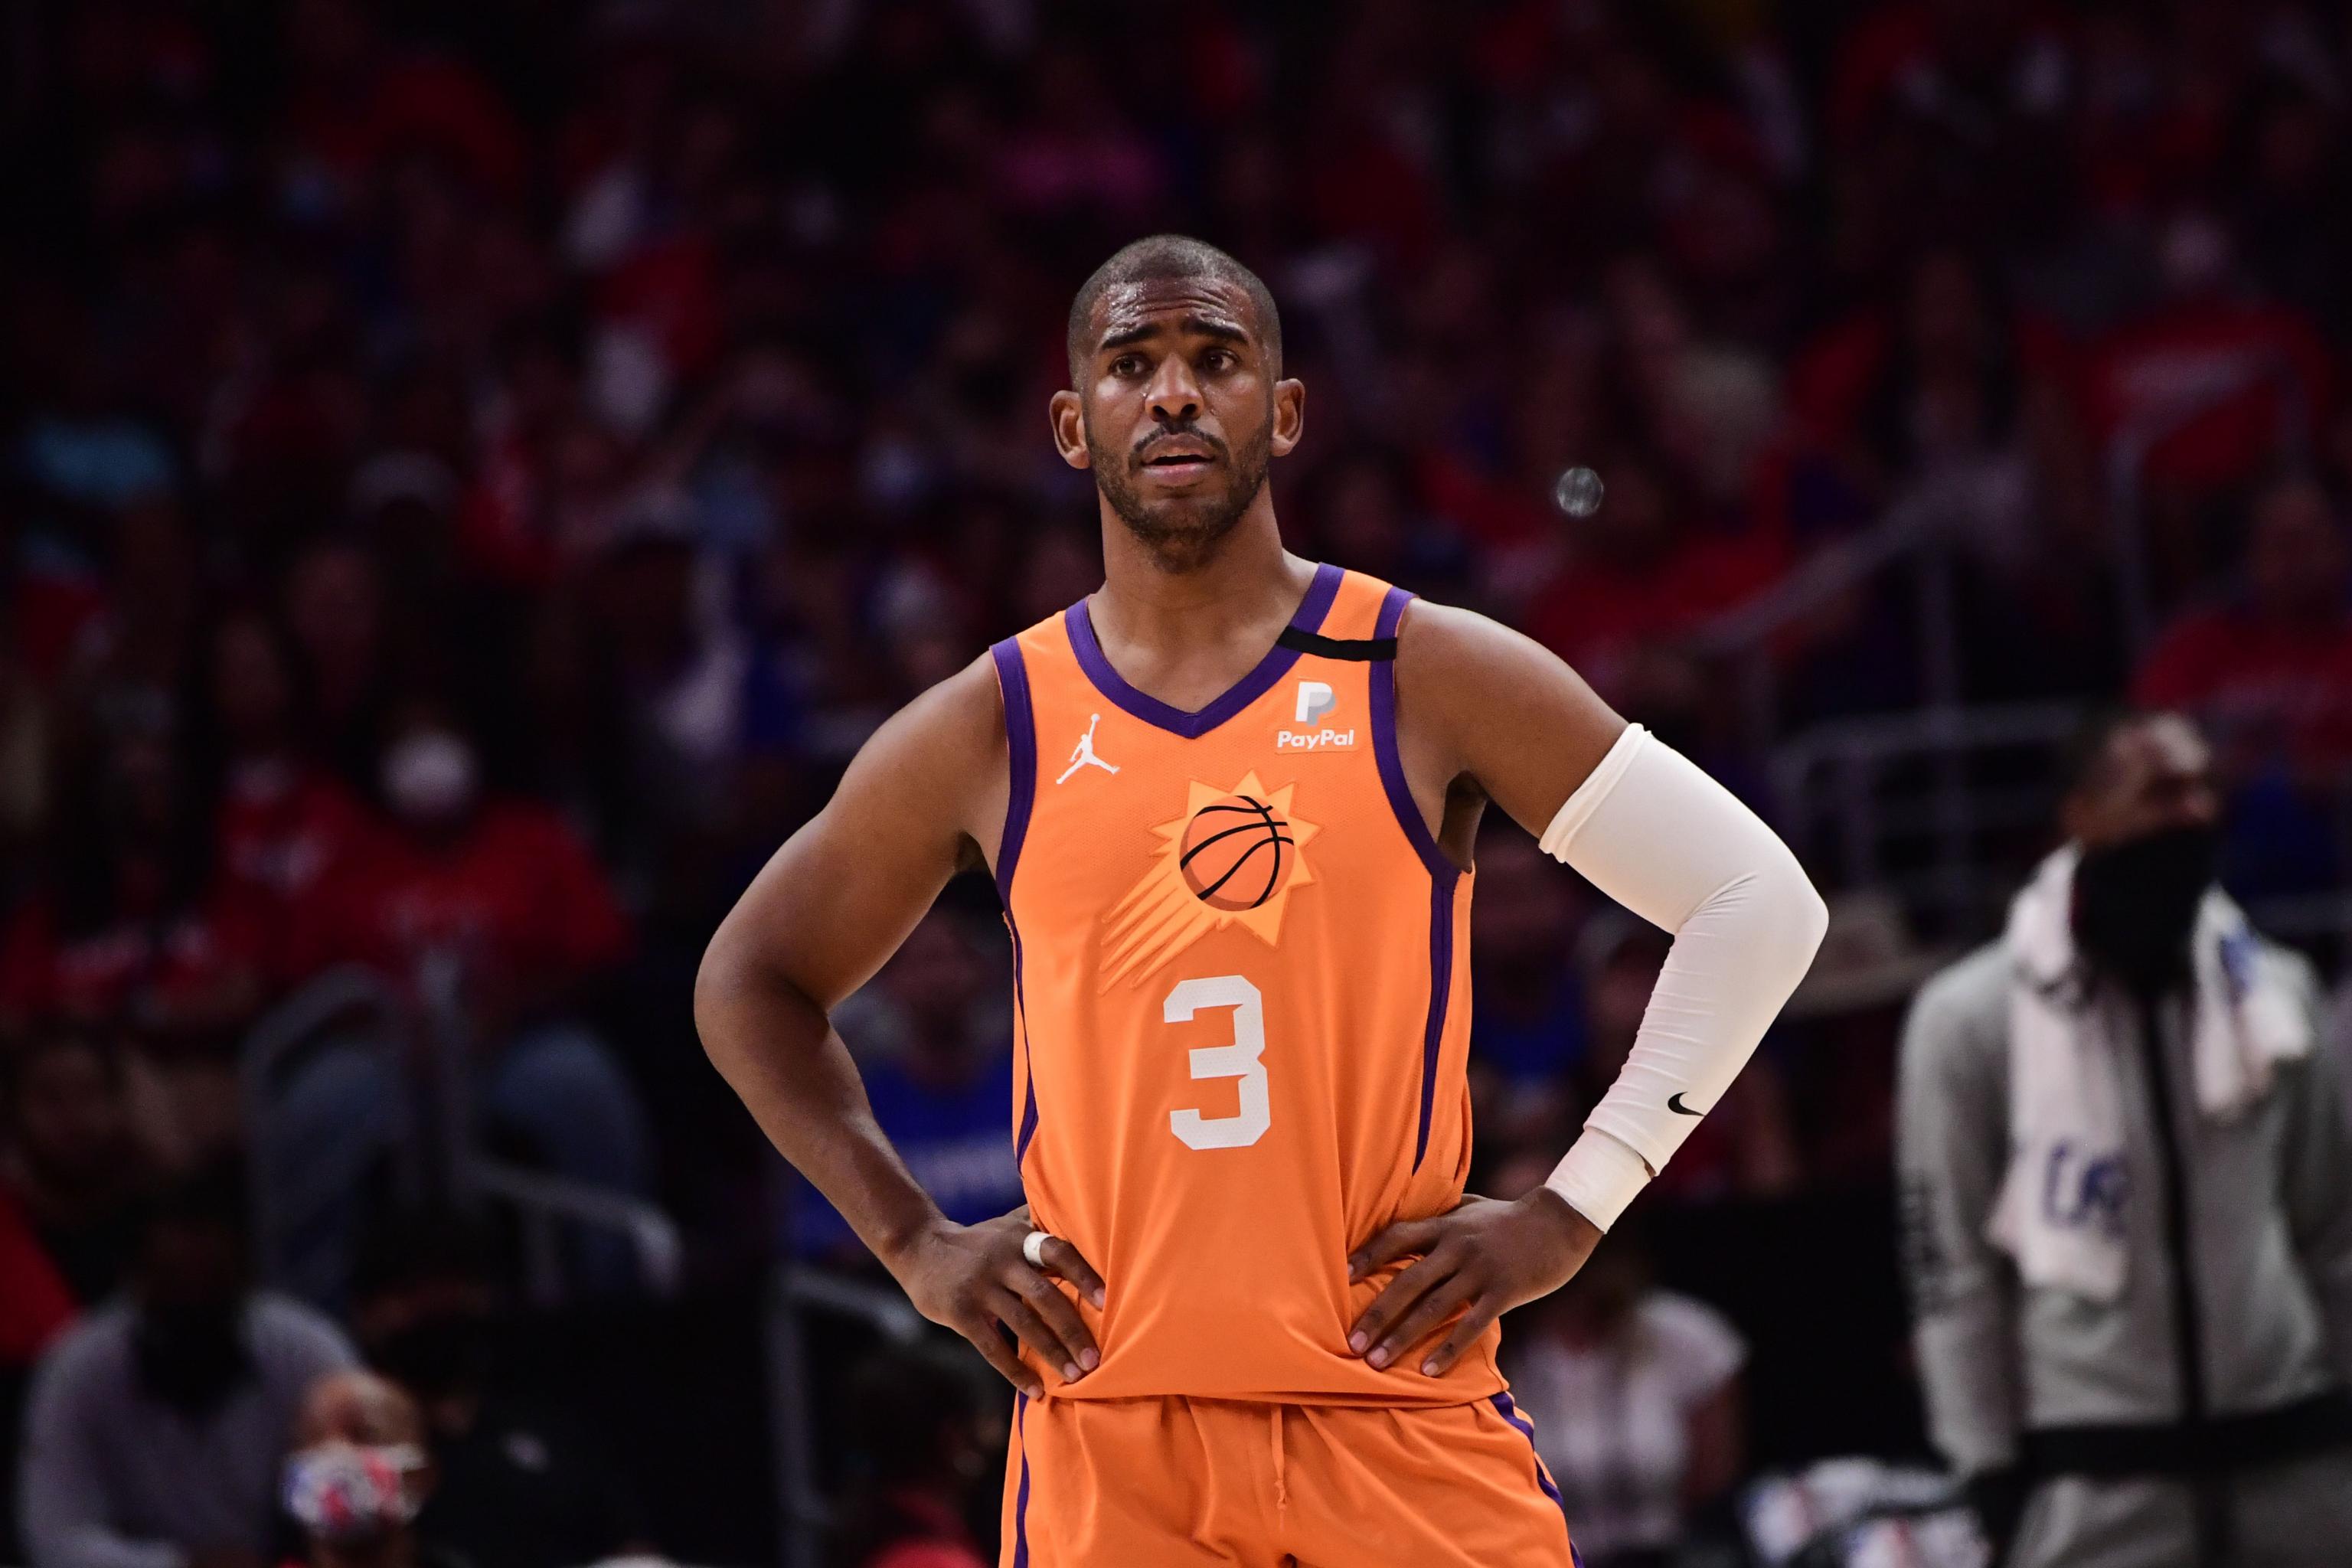 Chris Paul leads Suns past Clippers 130-103, into NBA Finals